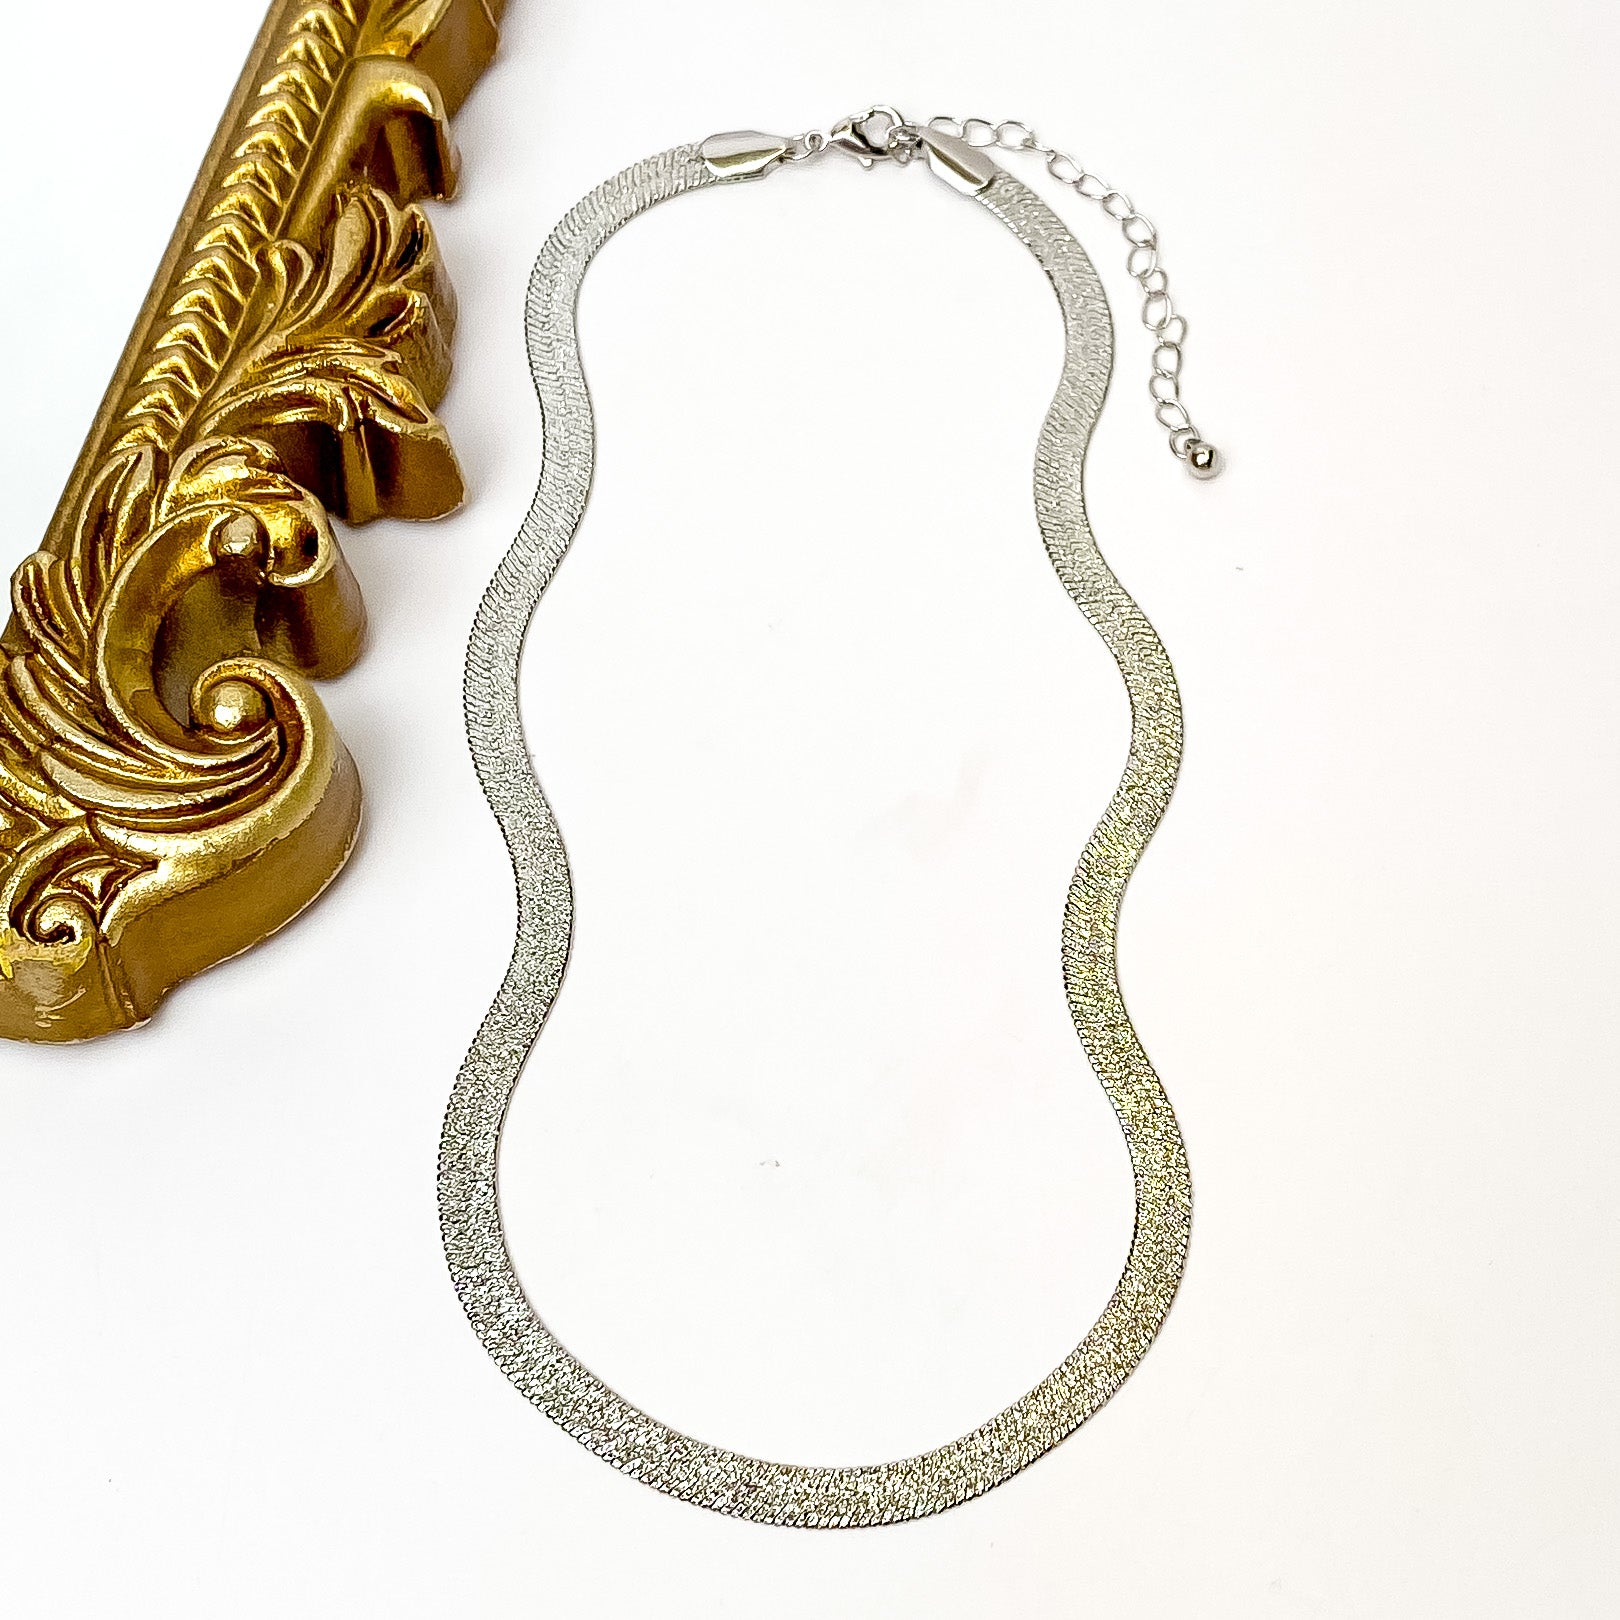 Silver herringbone chain necklace with a silver necklace adjuster. This necklace is pictured on a white background with a gold mirror on the left side. 